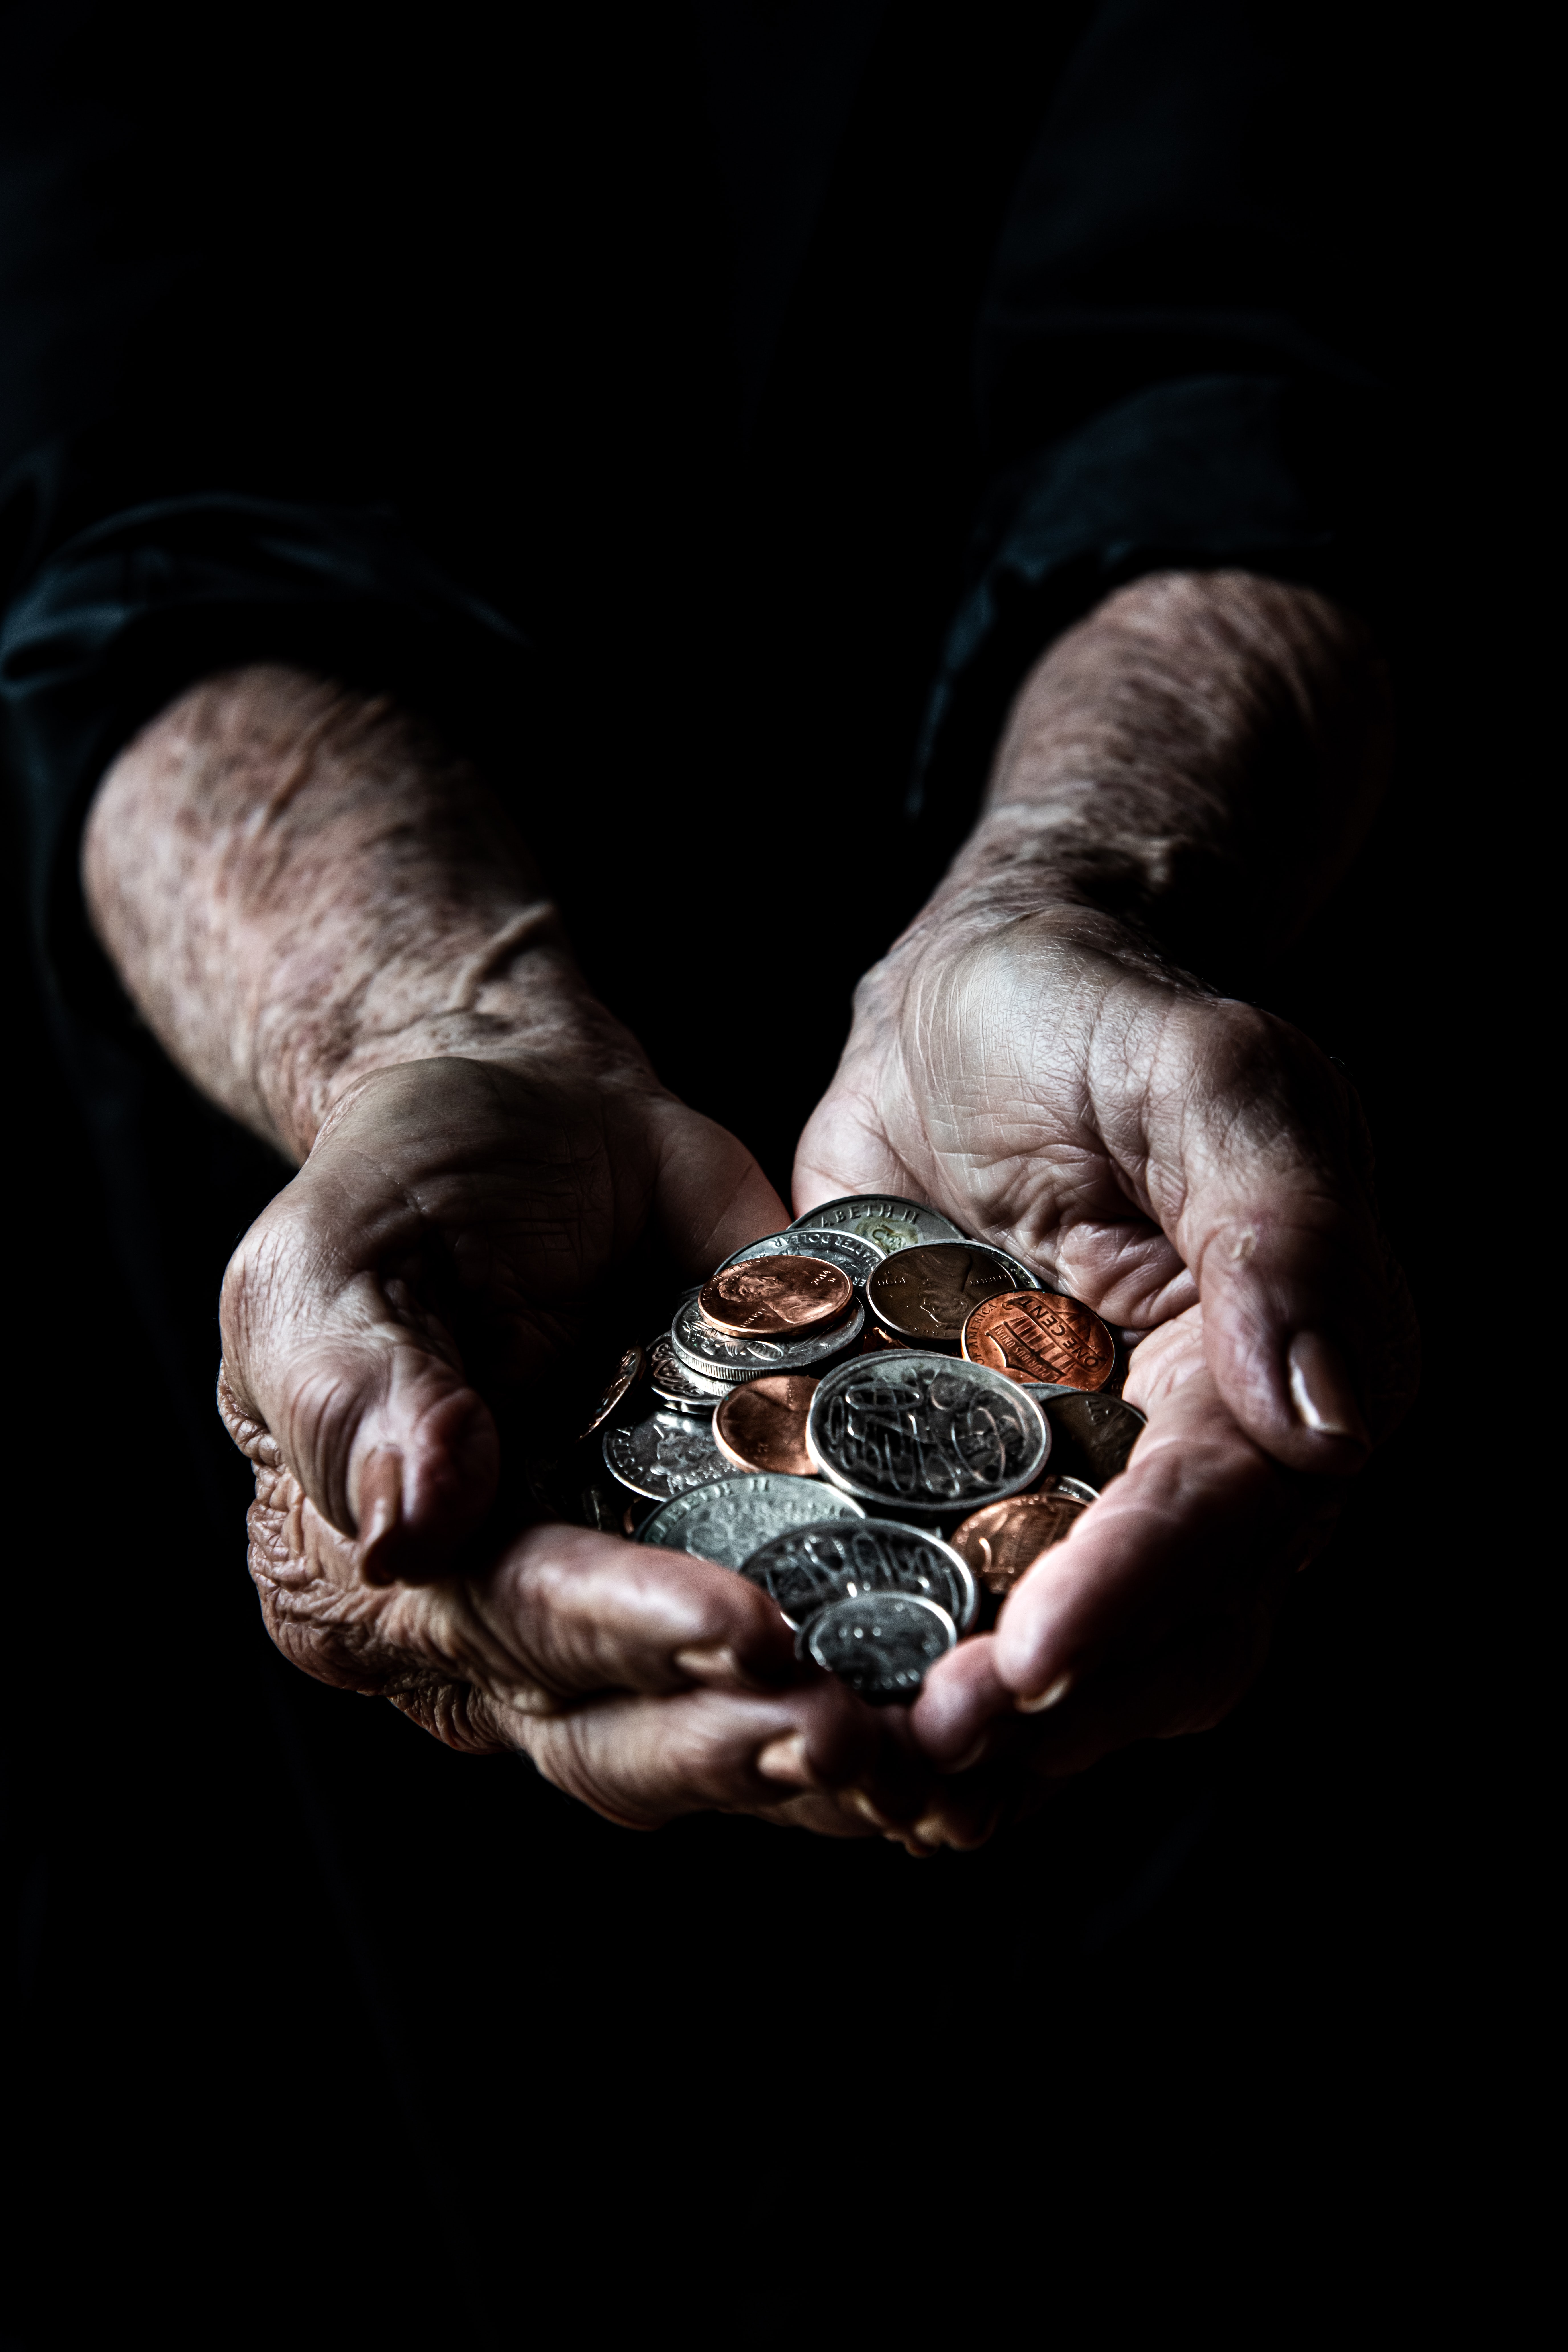 A photo of a pair of hands proffering a handful of coins to the viewer against a black background